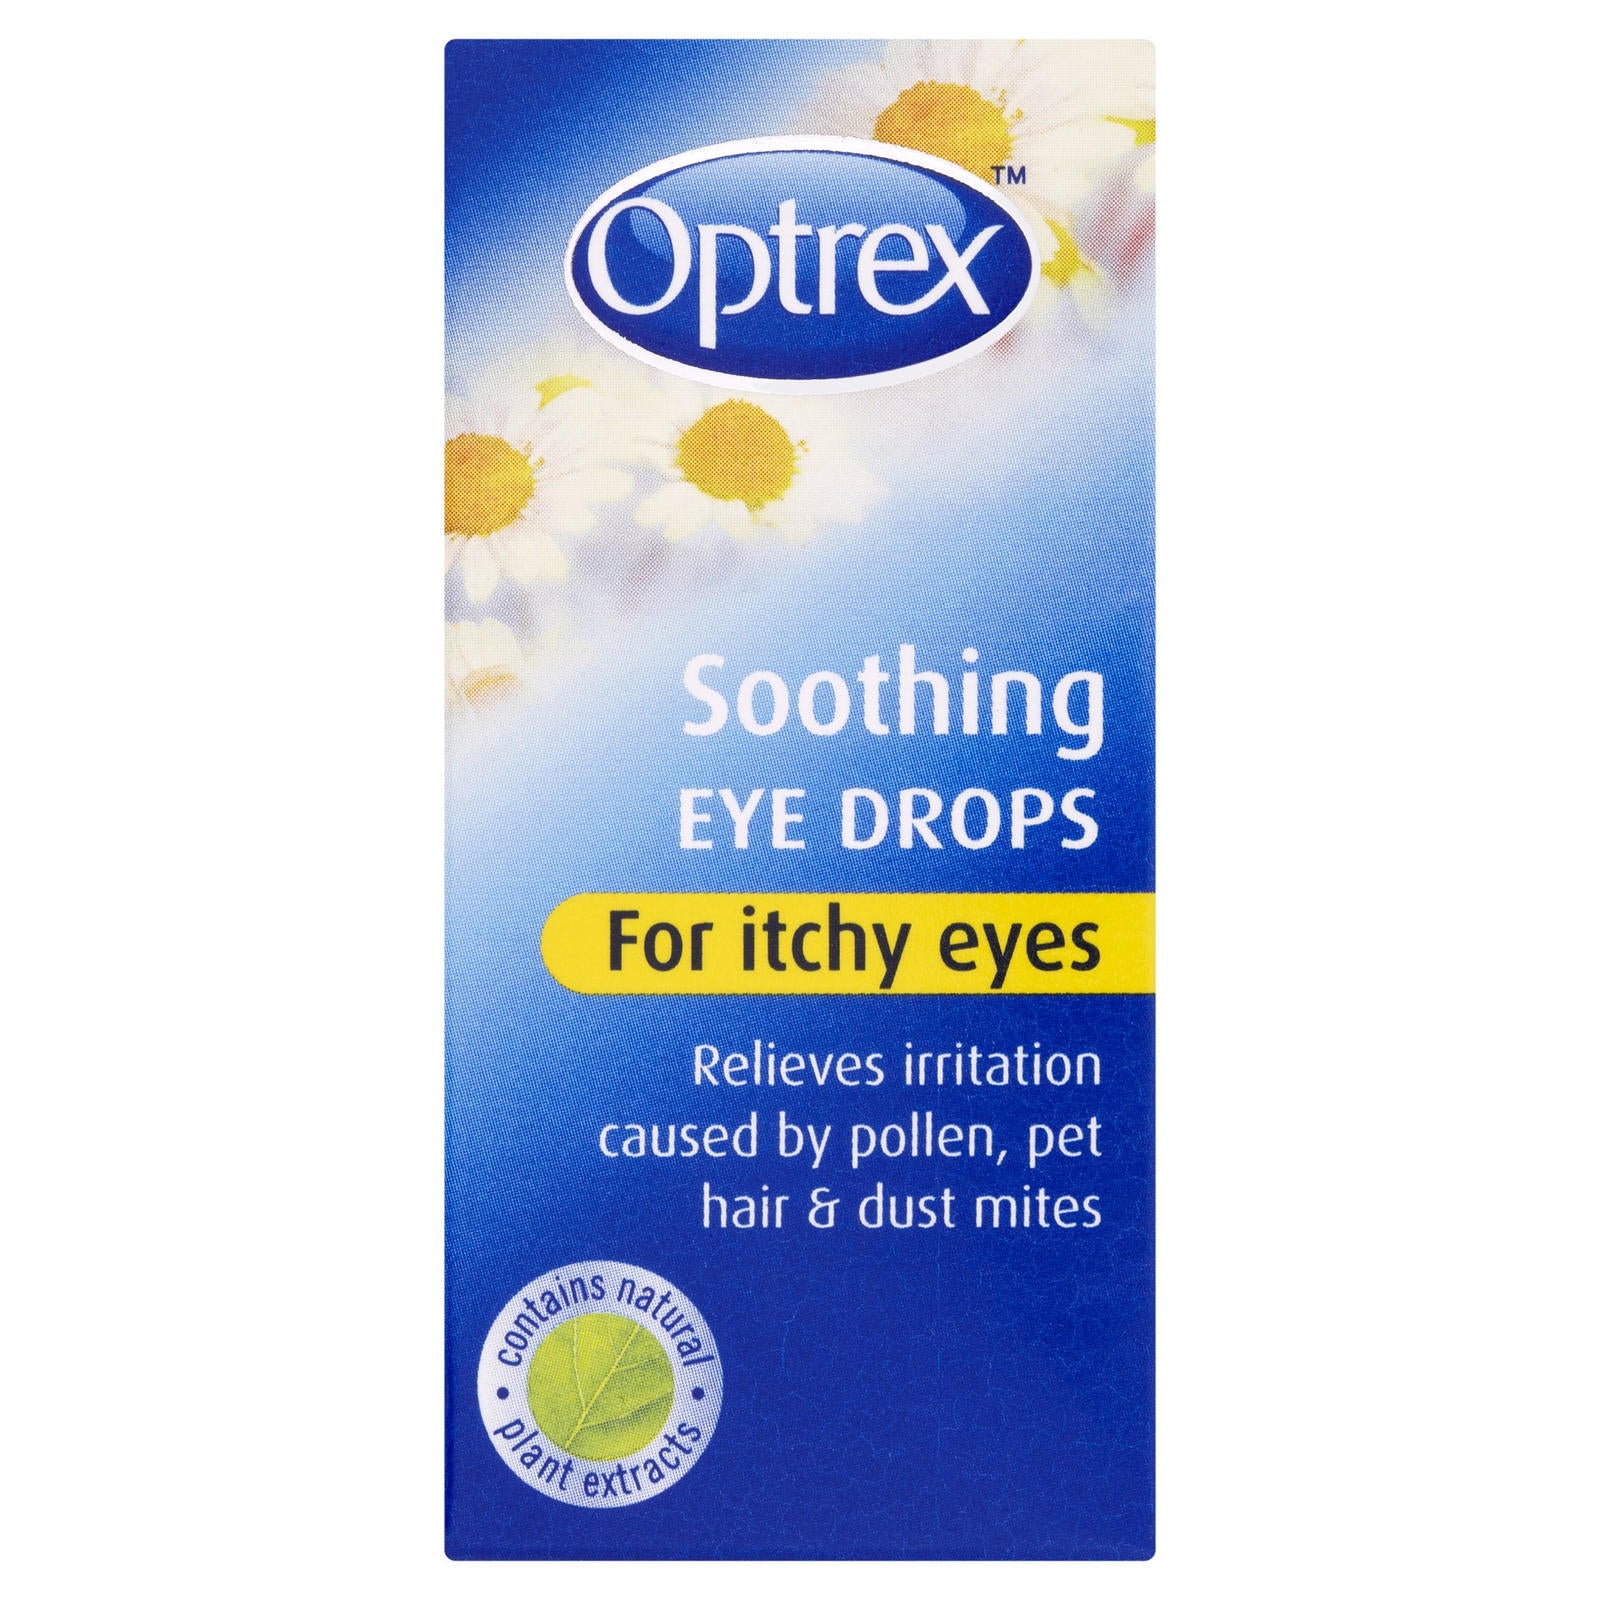 Optrex Soothing Eye Drops for Itchy Eyes - 10ml